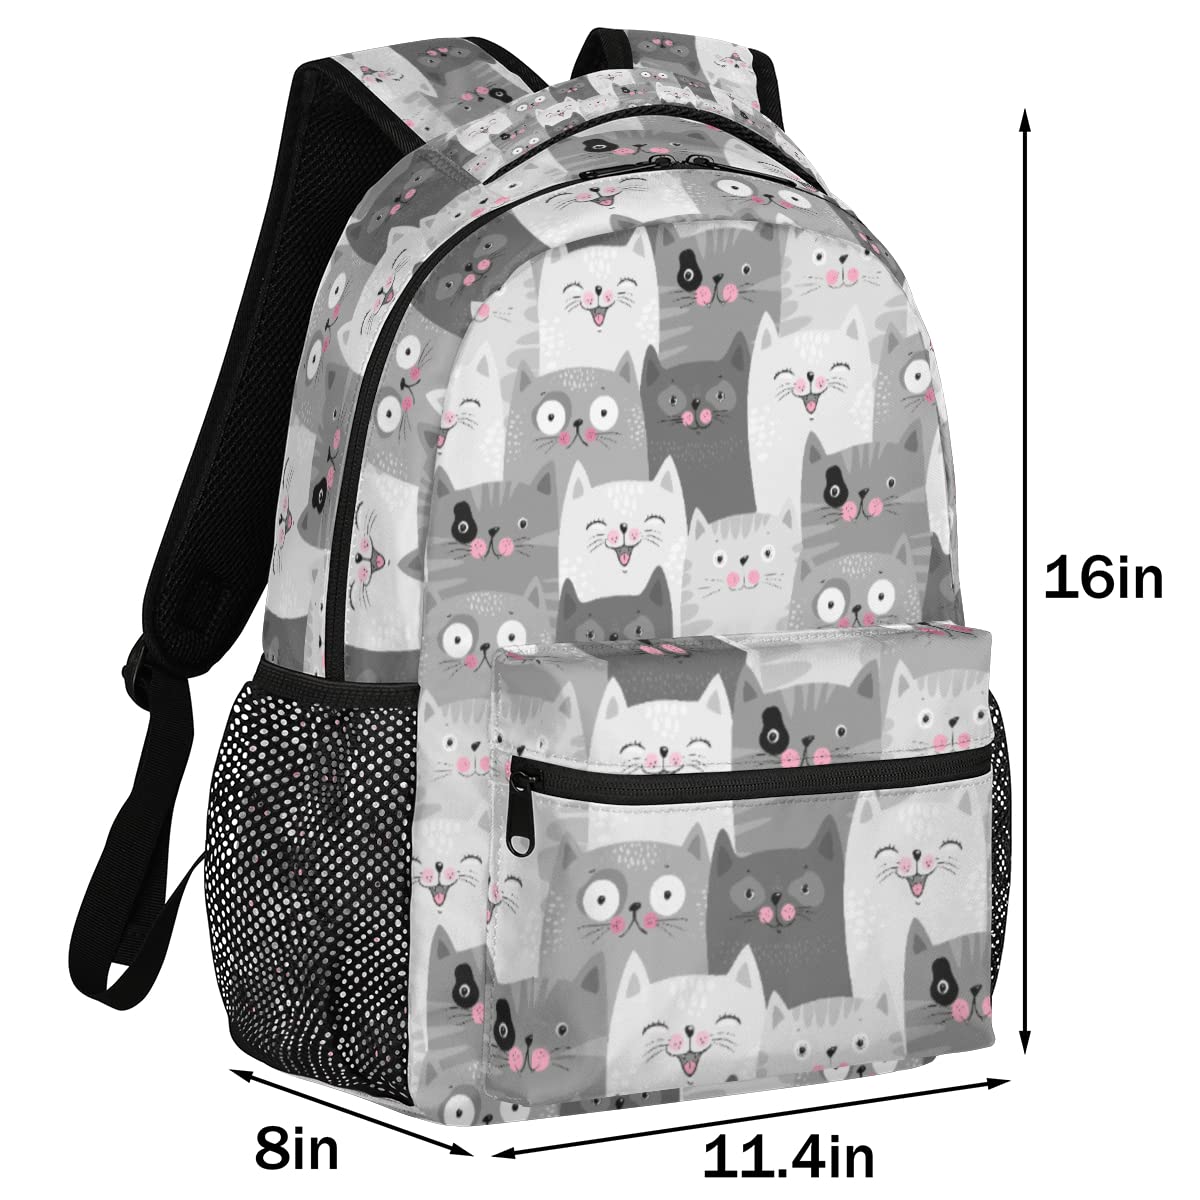 Cat Backpack for Boys Girls, Cute Animal Cats Kids School Backpacks Laptop Backpack Water Resistant Casual Hiking Camping Travel Daypack Lightweight Bookbag for Student with Adjustable Buckles